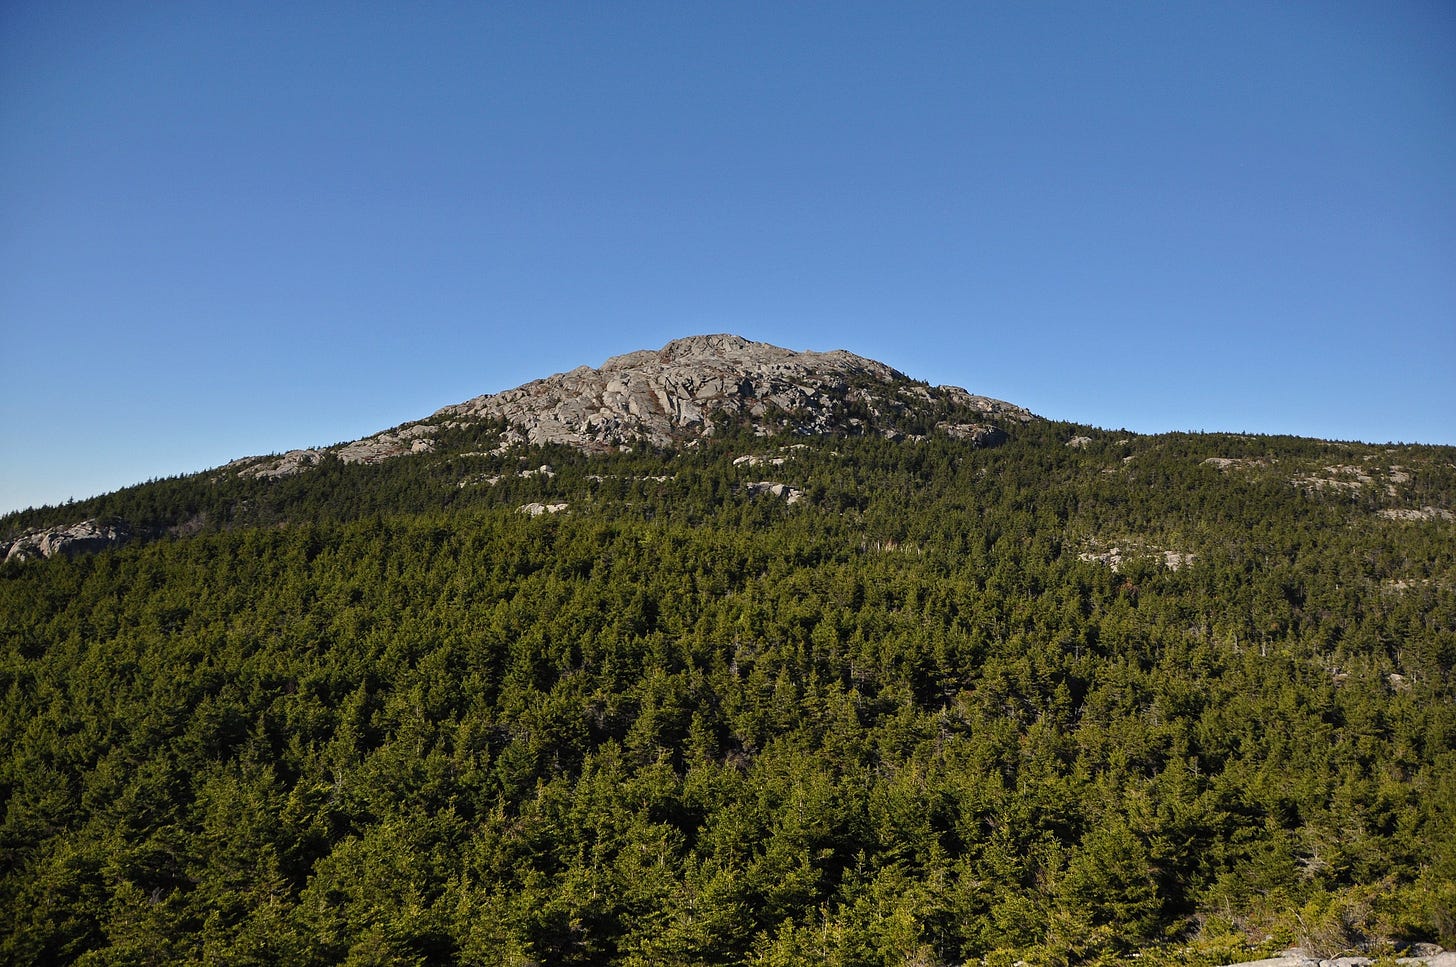 A view of Mount Monadnock, with its bare granite summit